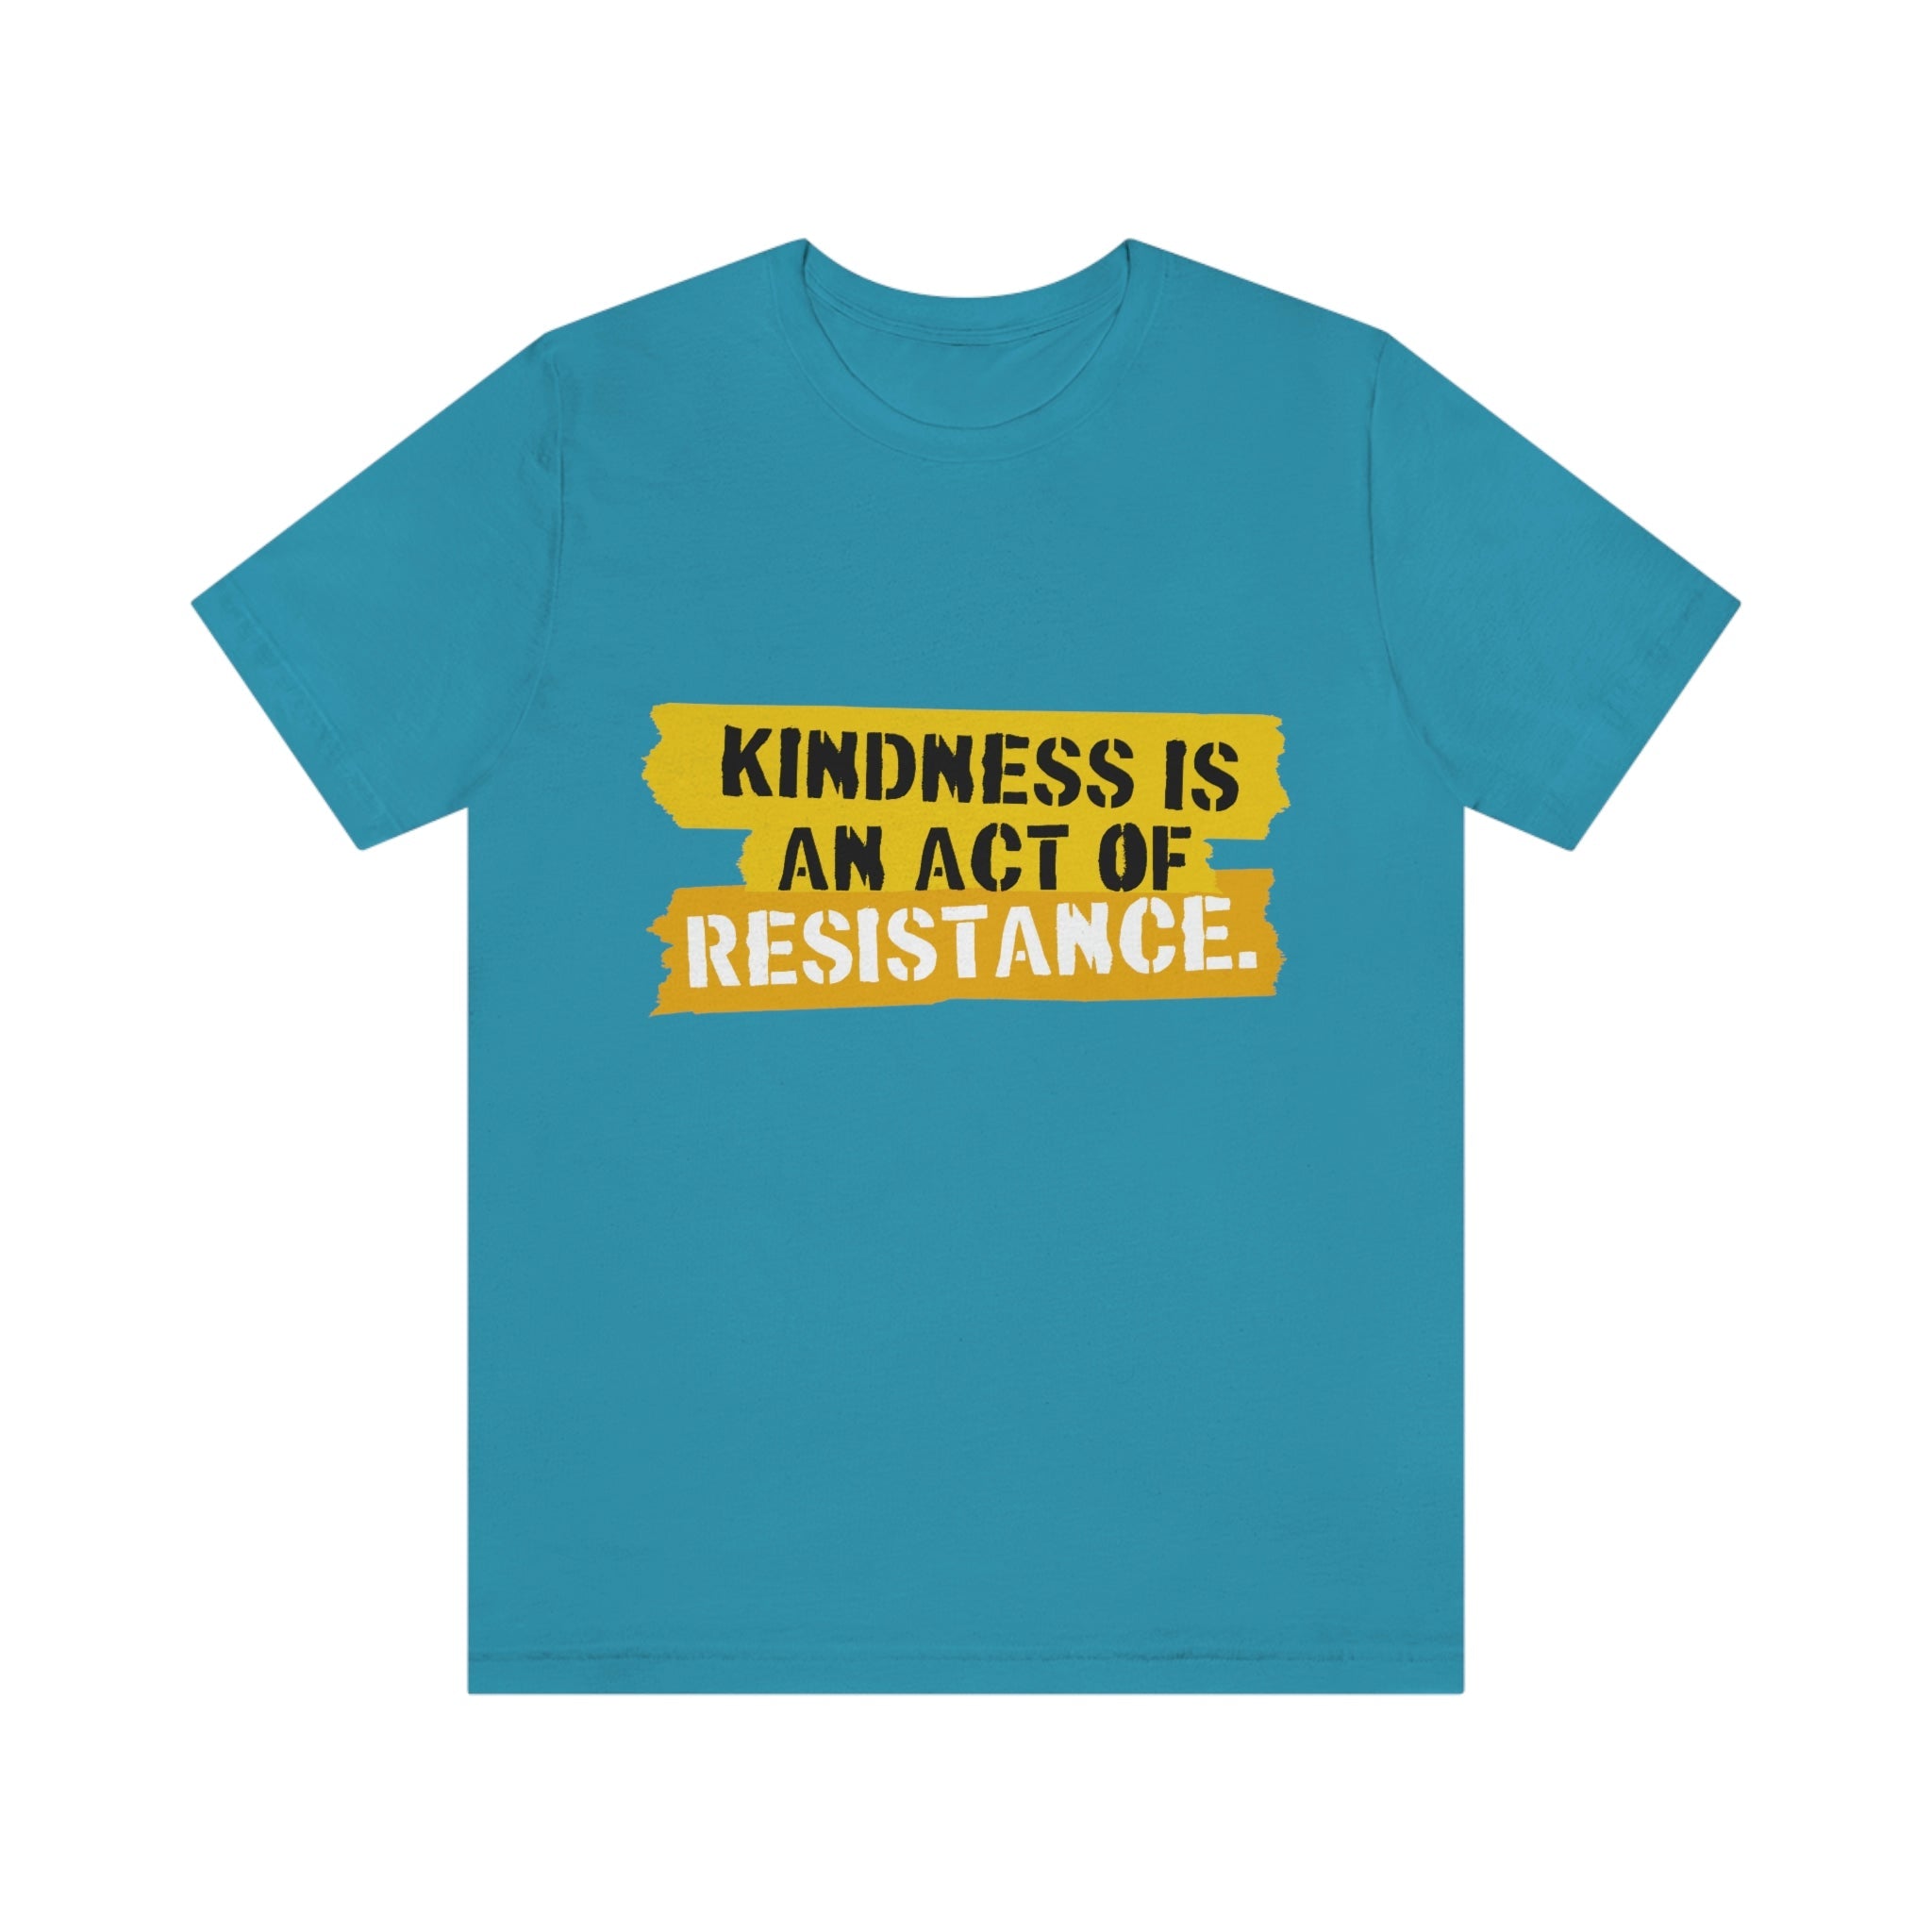 Kindness Is an Act of Resistance - Stencil Style : Unisex 100% Premium Cotton T-Shirt